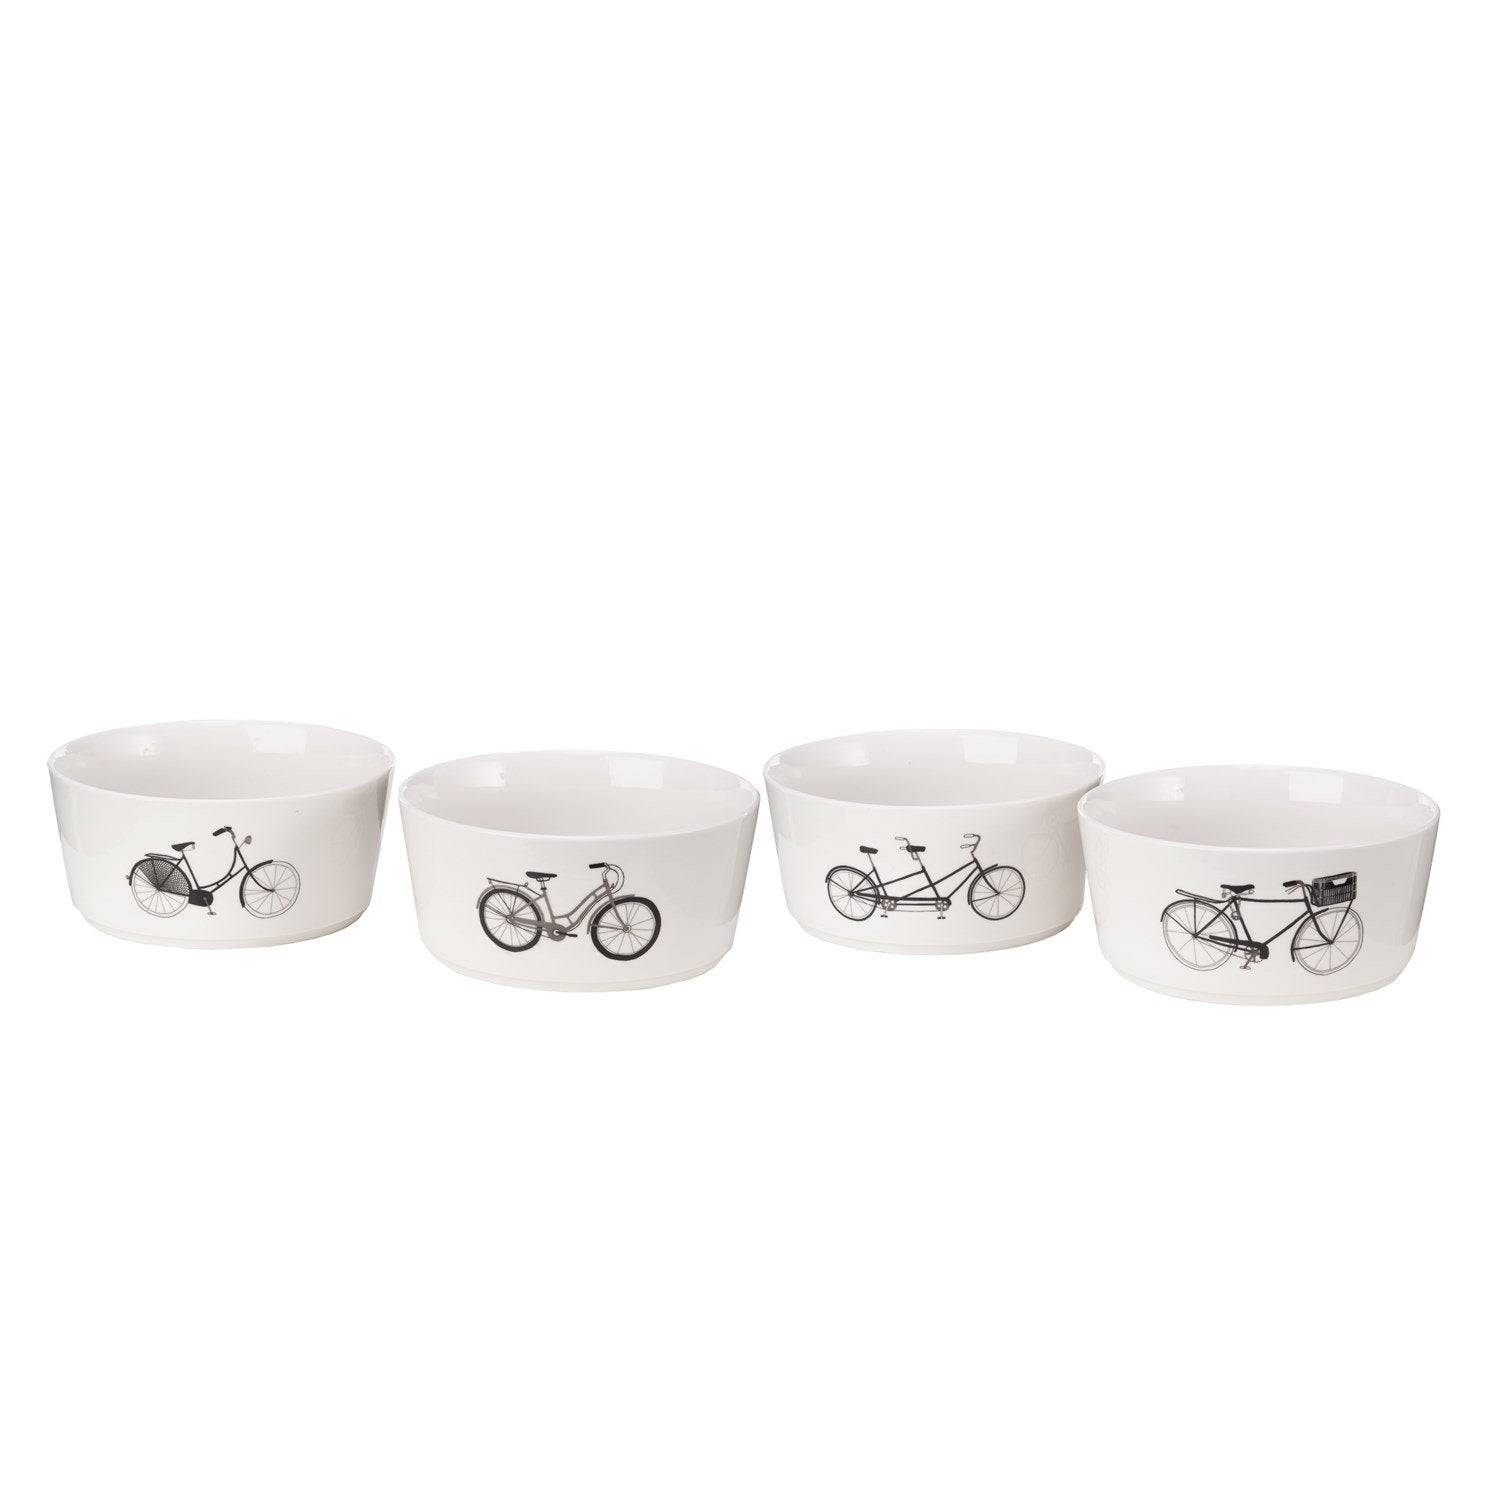 Bicycle Bowls Set of 4 Tabletop Non-stock Pols Potten Serving Tabletop